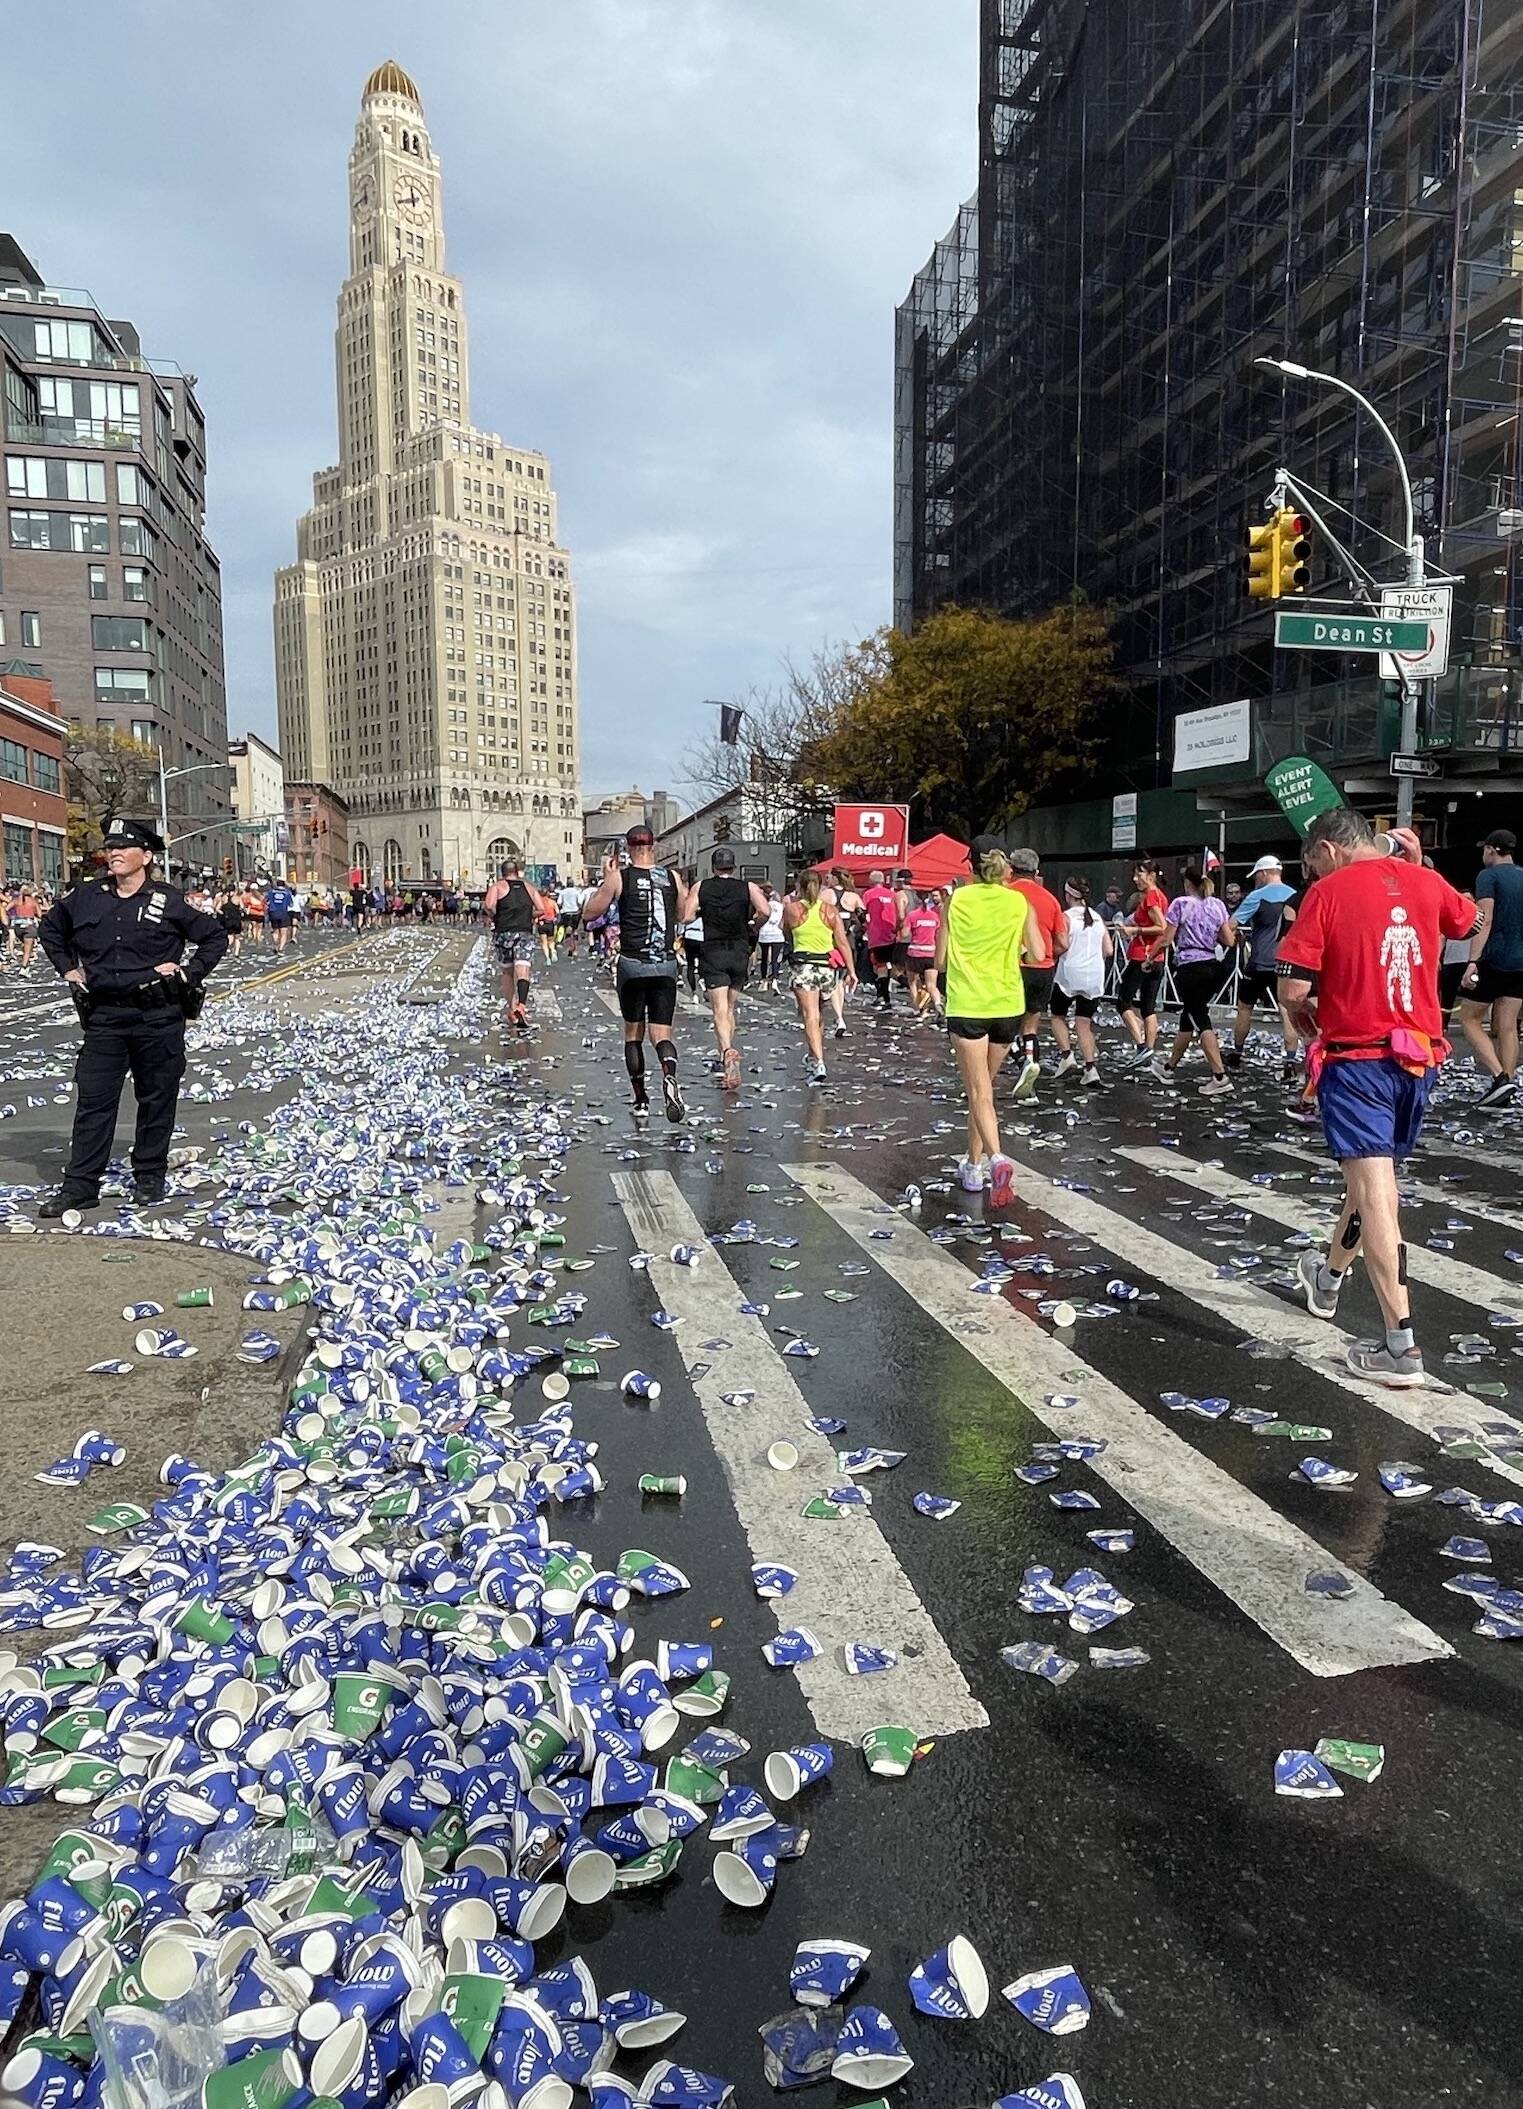 Cups that held sports drinks and water pile up on a Brooklyn Street during the New York City Marathon on Nov. 6, 2022. (Courtesy Photo / Ned Rozell)